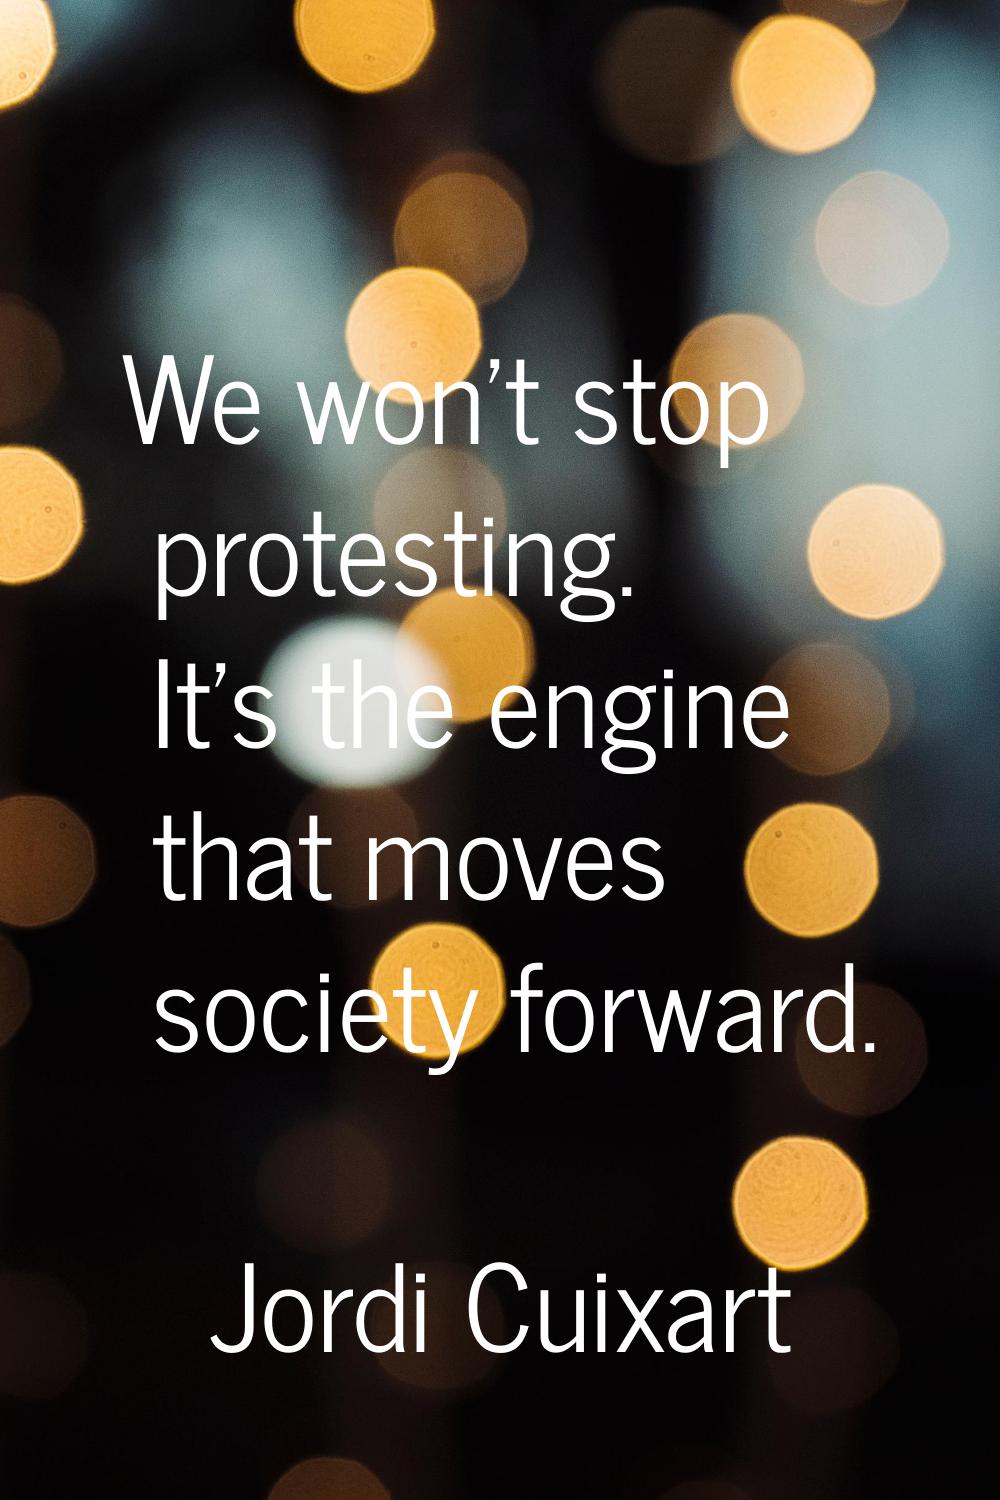 We won't stop protesting. It's the engine that moves society forward.